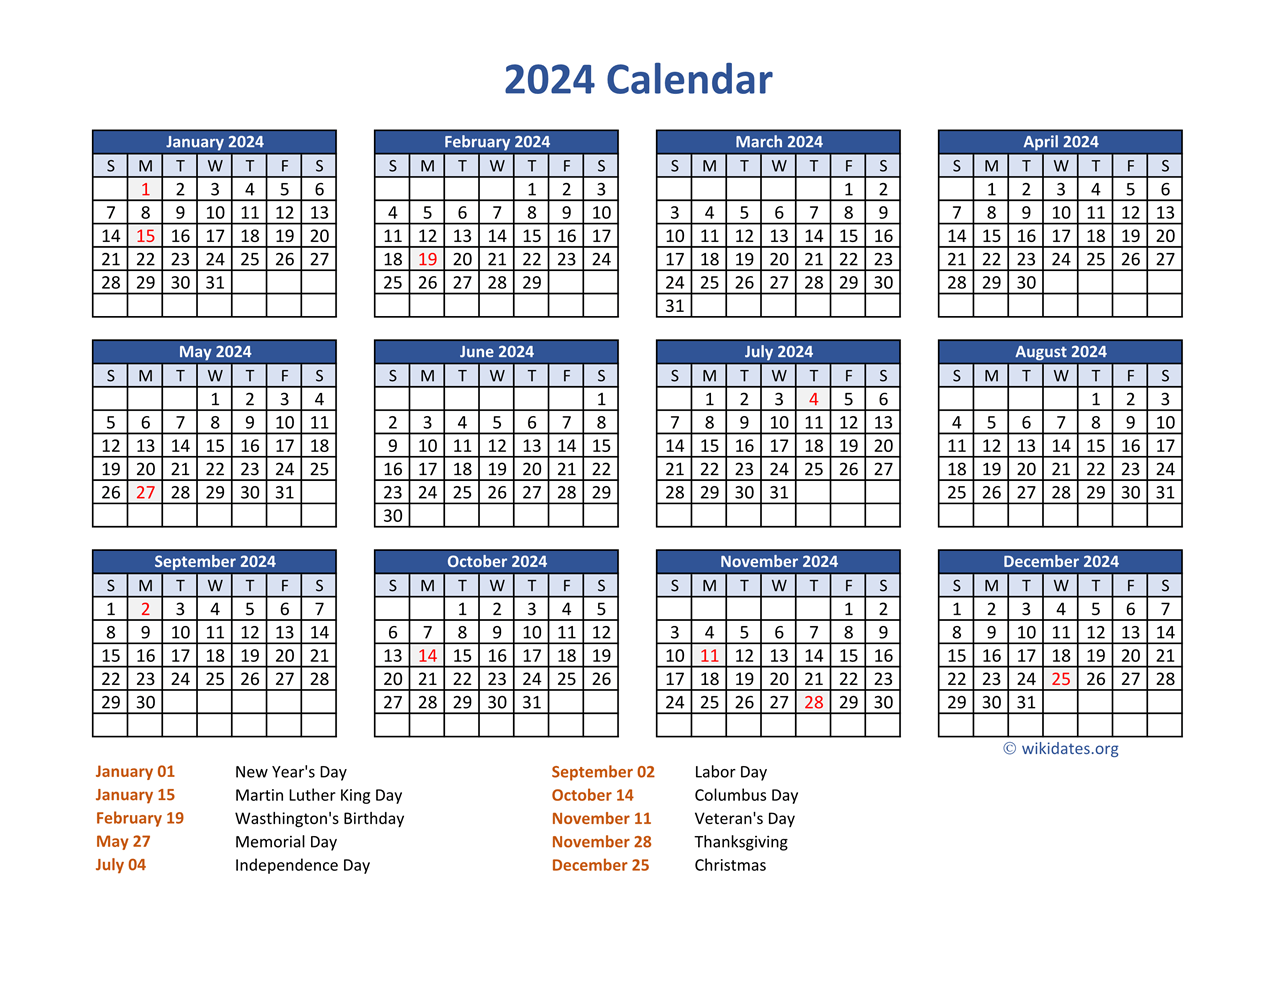 Pdf Calendar 2024 With Federal Holidays | Wikidates for Free Printable Calendar For 2024 With Holidays